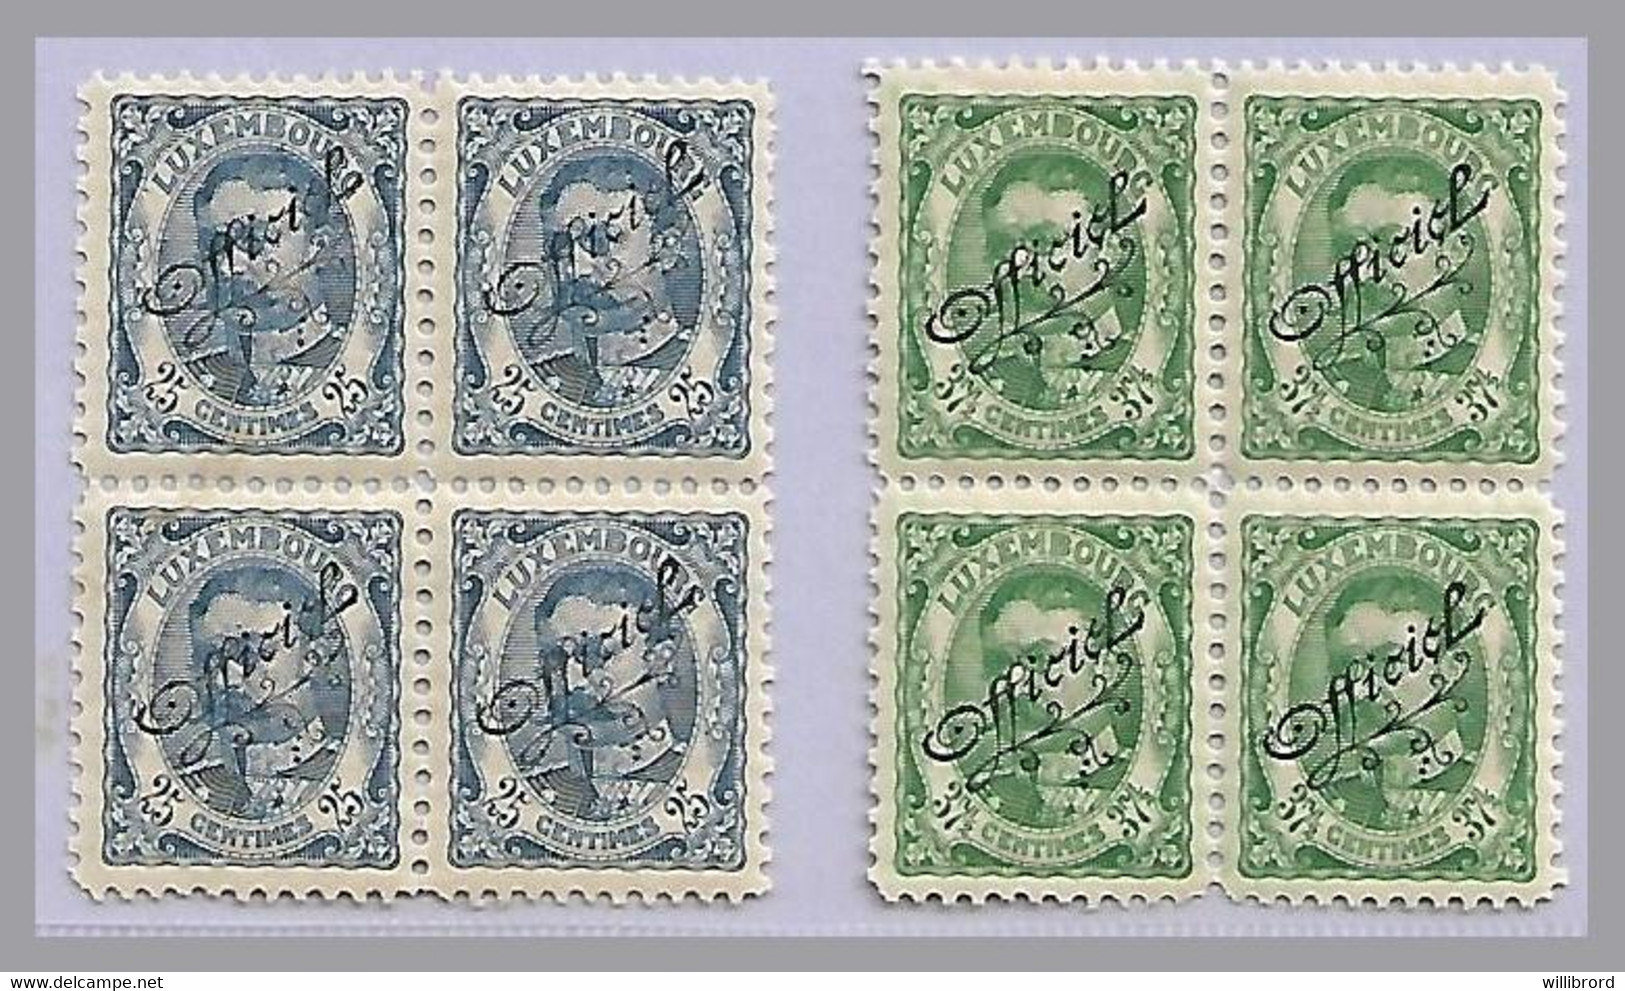 LUXEMBOURG - G.D. William IV OFFICIALS  - 25c & 37½c Blocks Of 4 - Mint Never Hinged - 1906 Guillermo IV